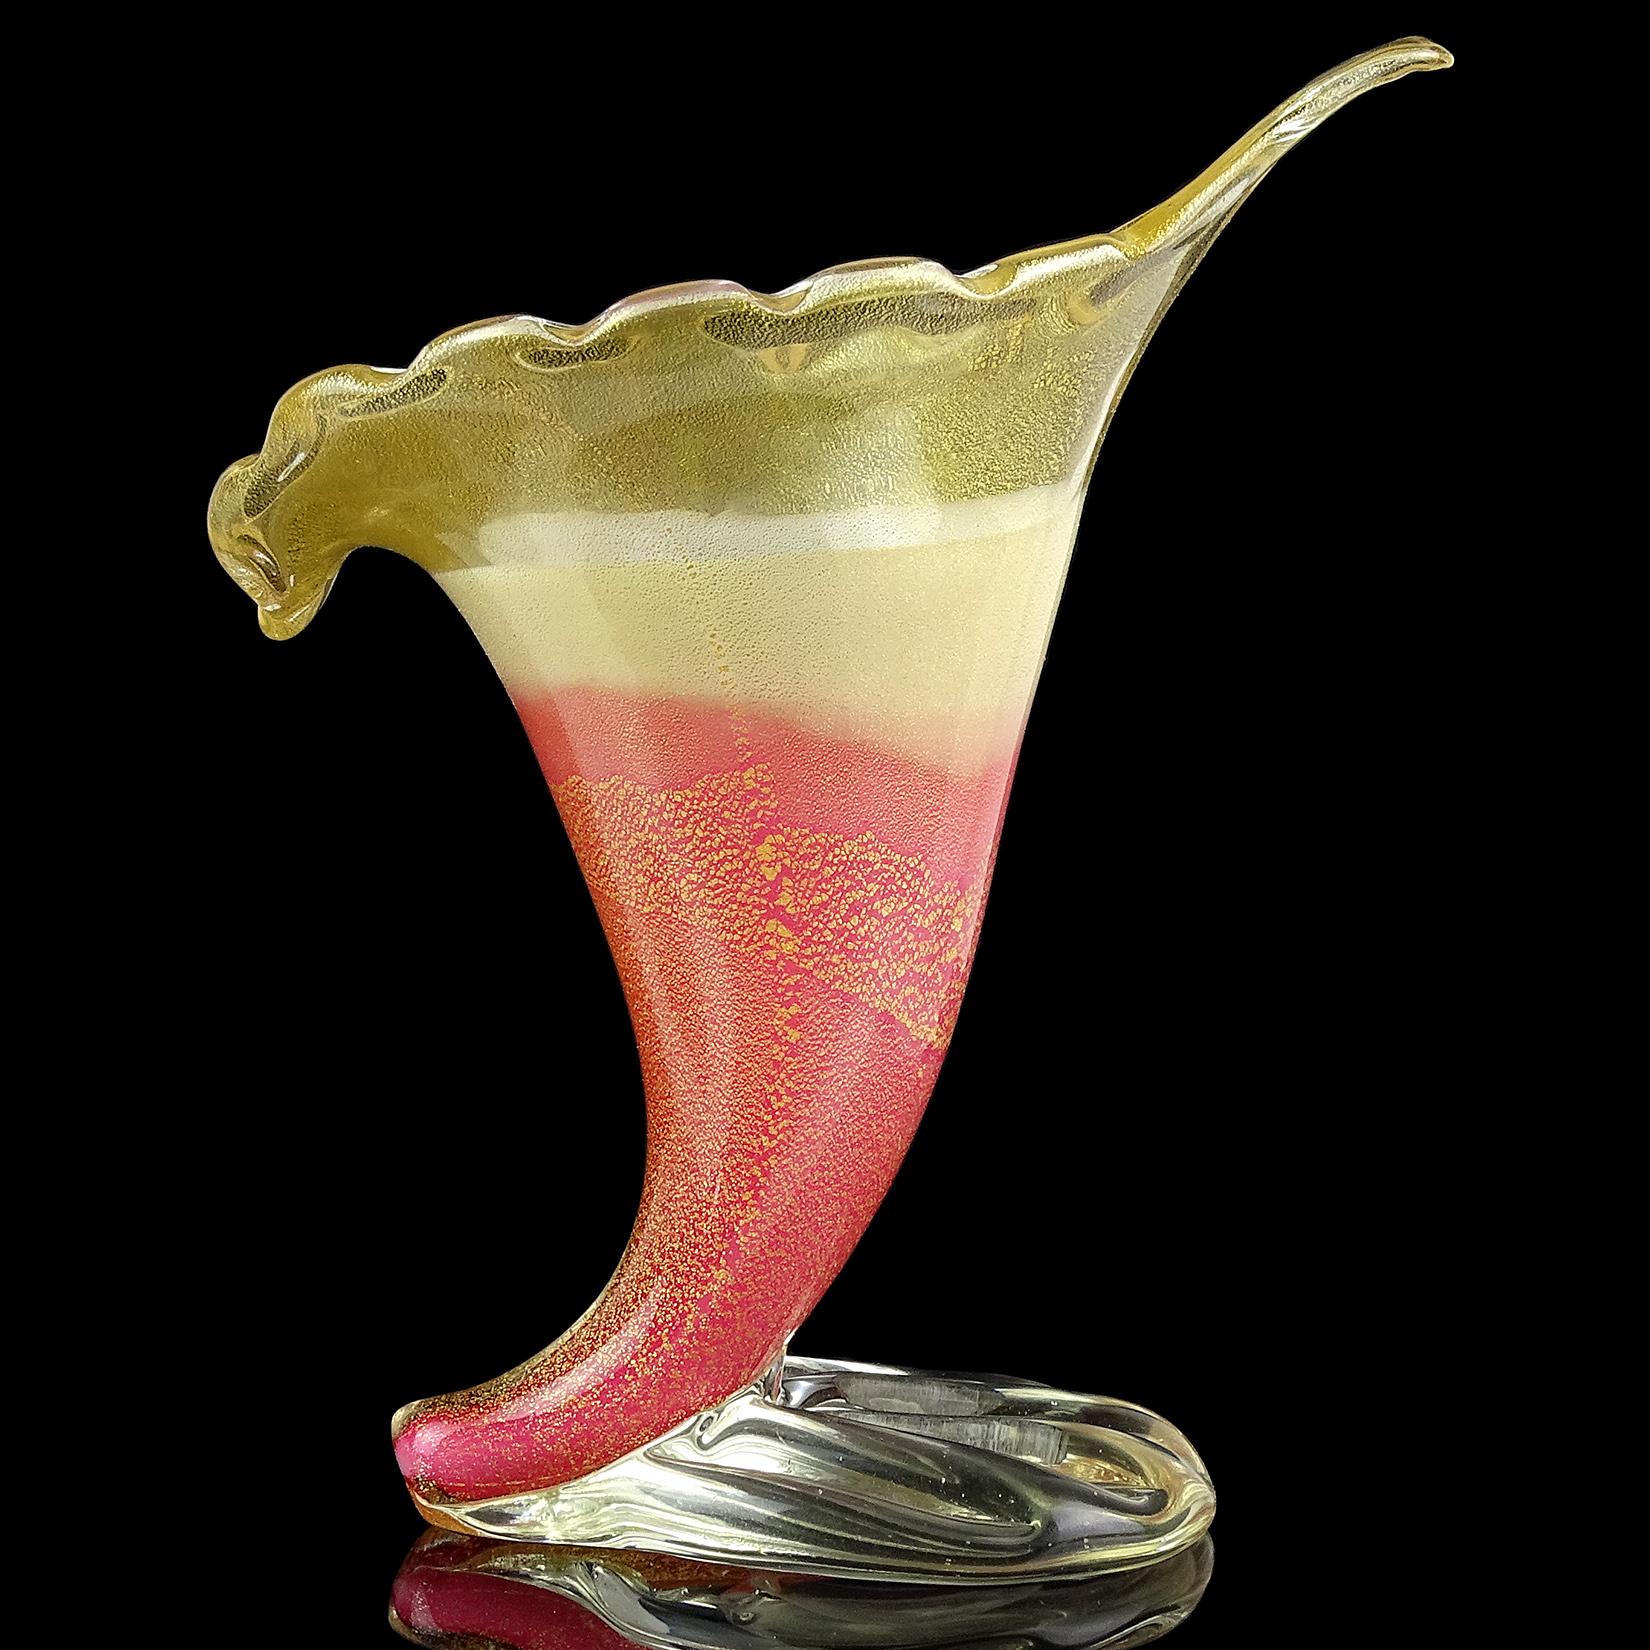 Gorgeous vintage Murano hand blown pink, white and gold flecks Italian art glass flower vase. Documented to designer Dino Martens for Aureliano Toso, circa 1954, model number 5669 (published). The piece has a lower pink layer, followed by a white